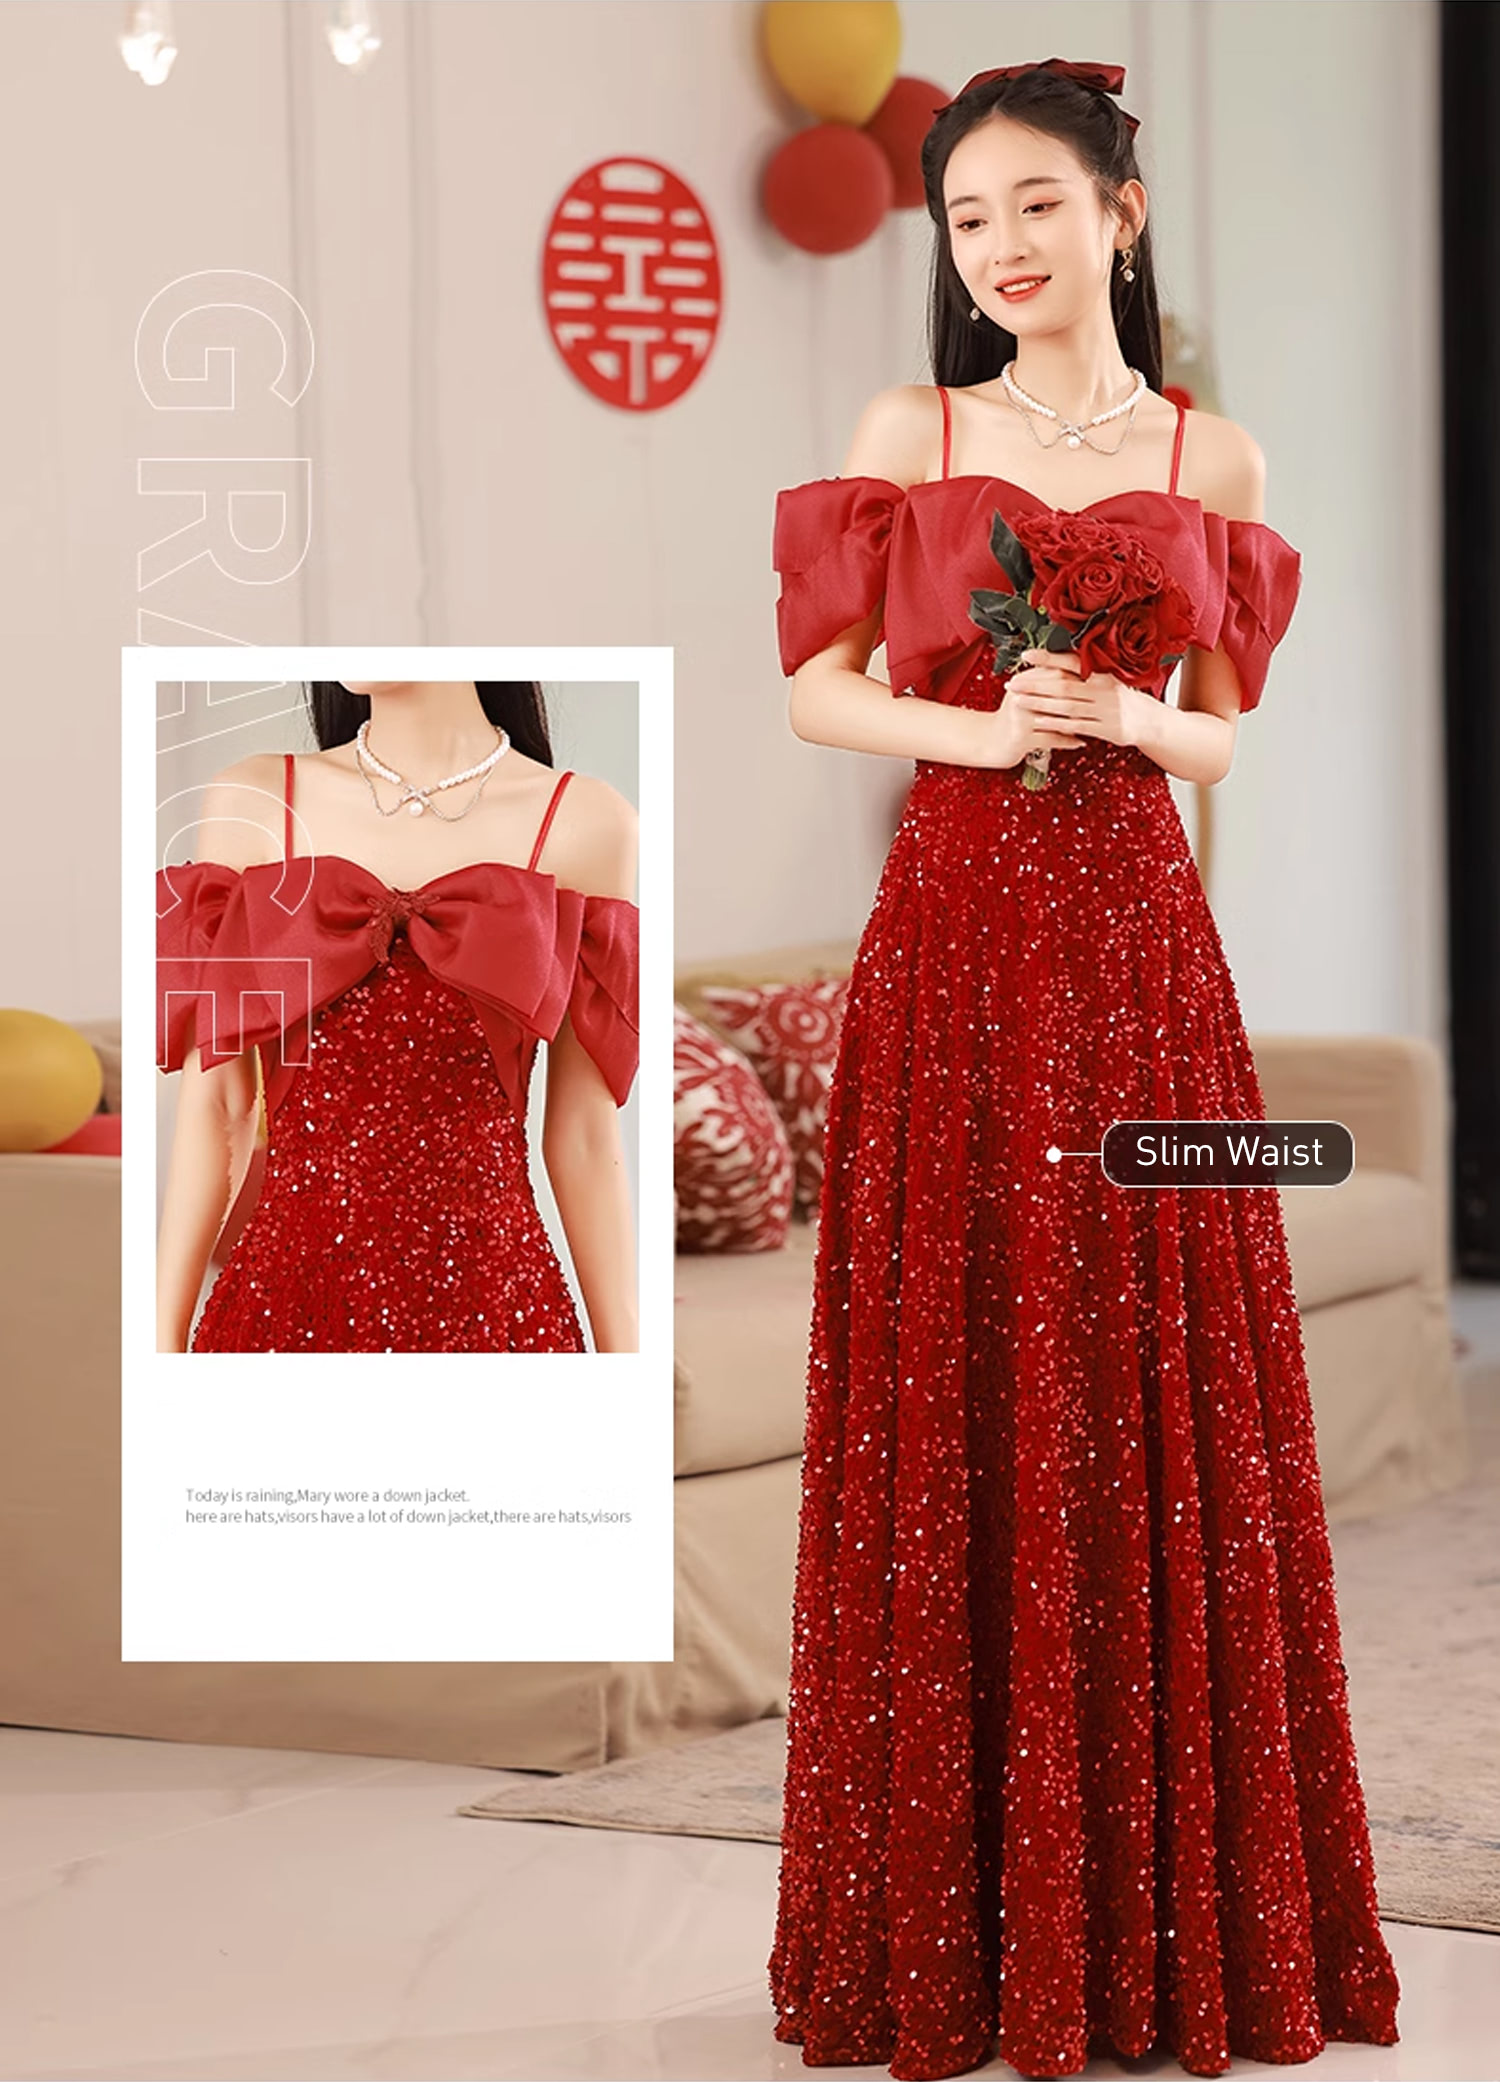 Sweet-Burgundy-Sequin-Bow-Tie-Neck-Slip-Party-Long-Dress-Ball-Gown07